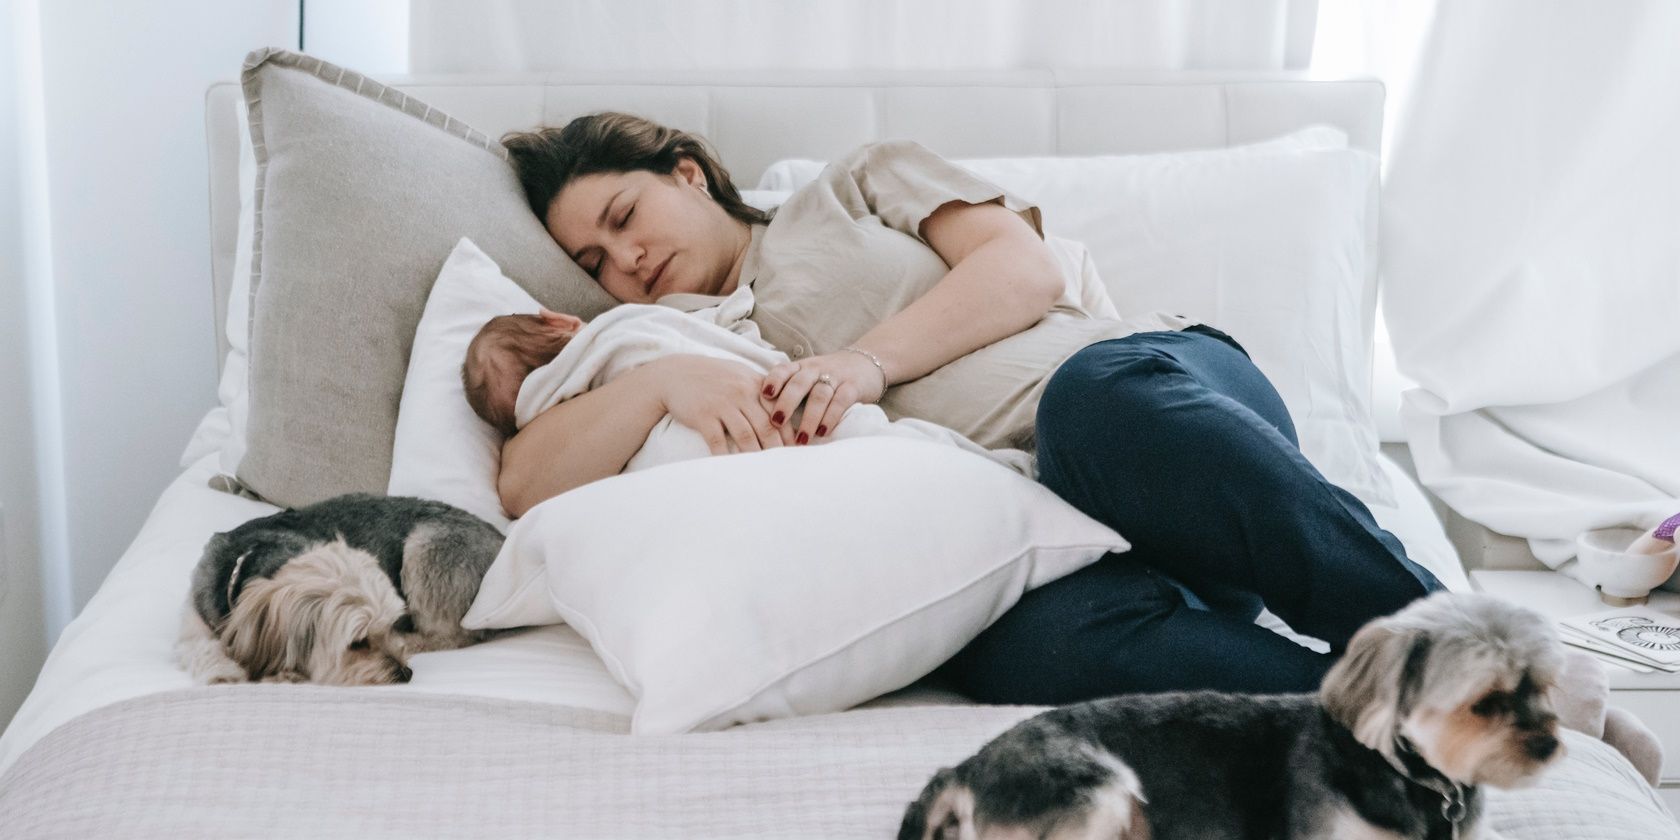 exhausted mom lying in bed with baby sleeping